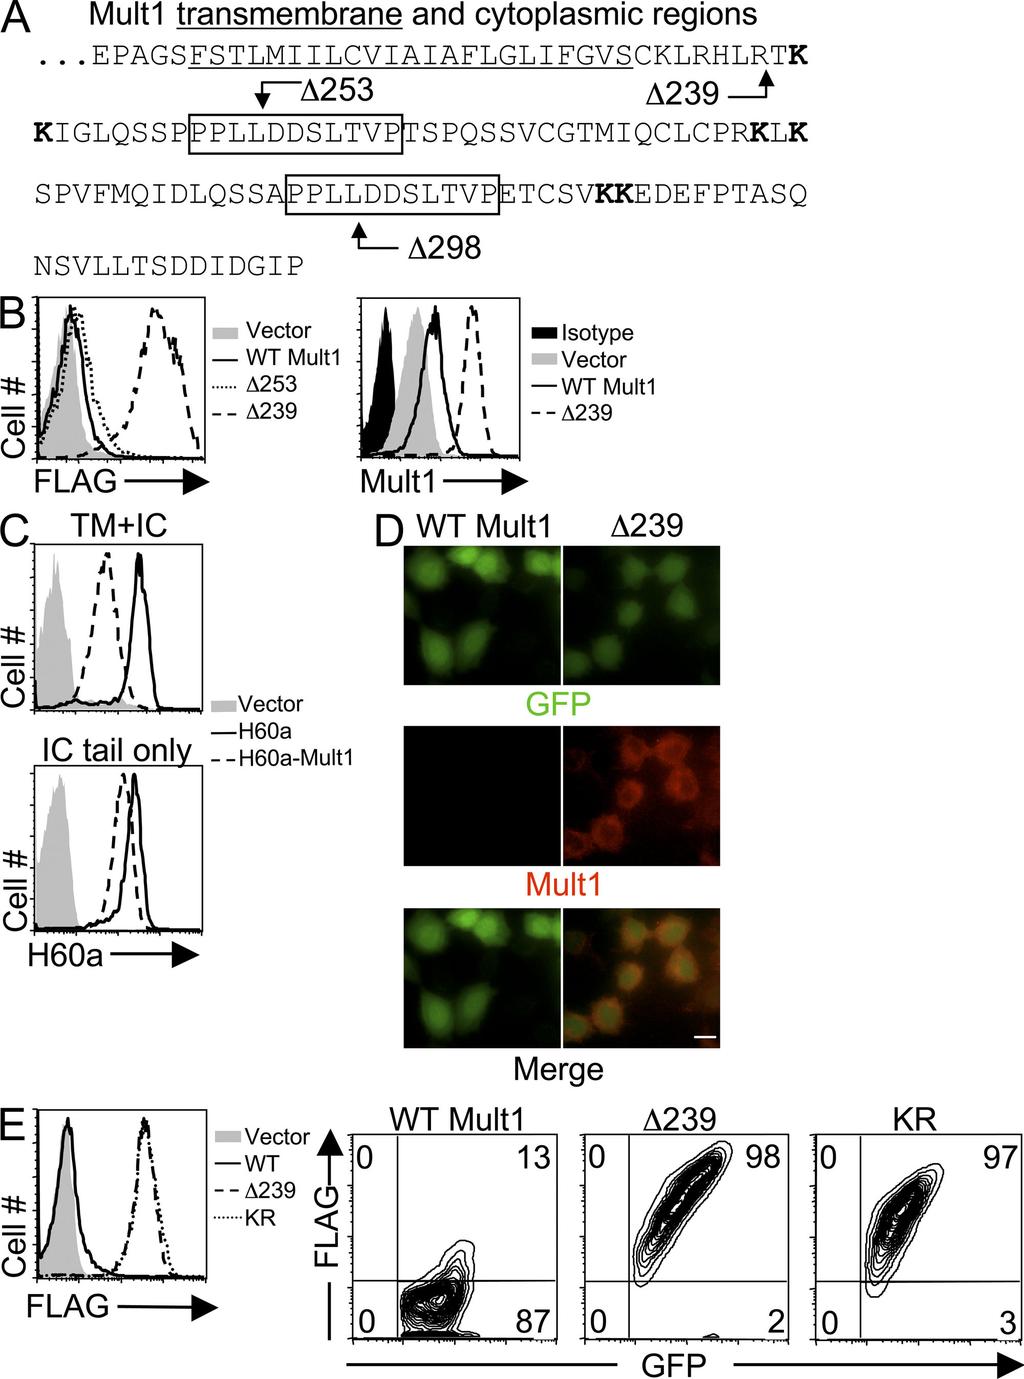 ARTICLE transduced with the 239 mutant compared with cells transduced with WT Mult1 ( Fig. 2 B, right).